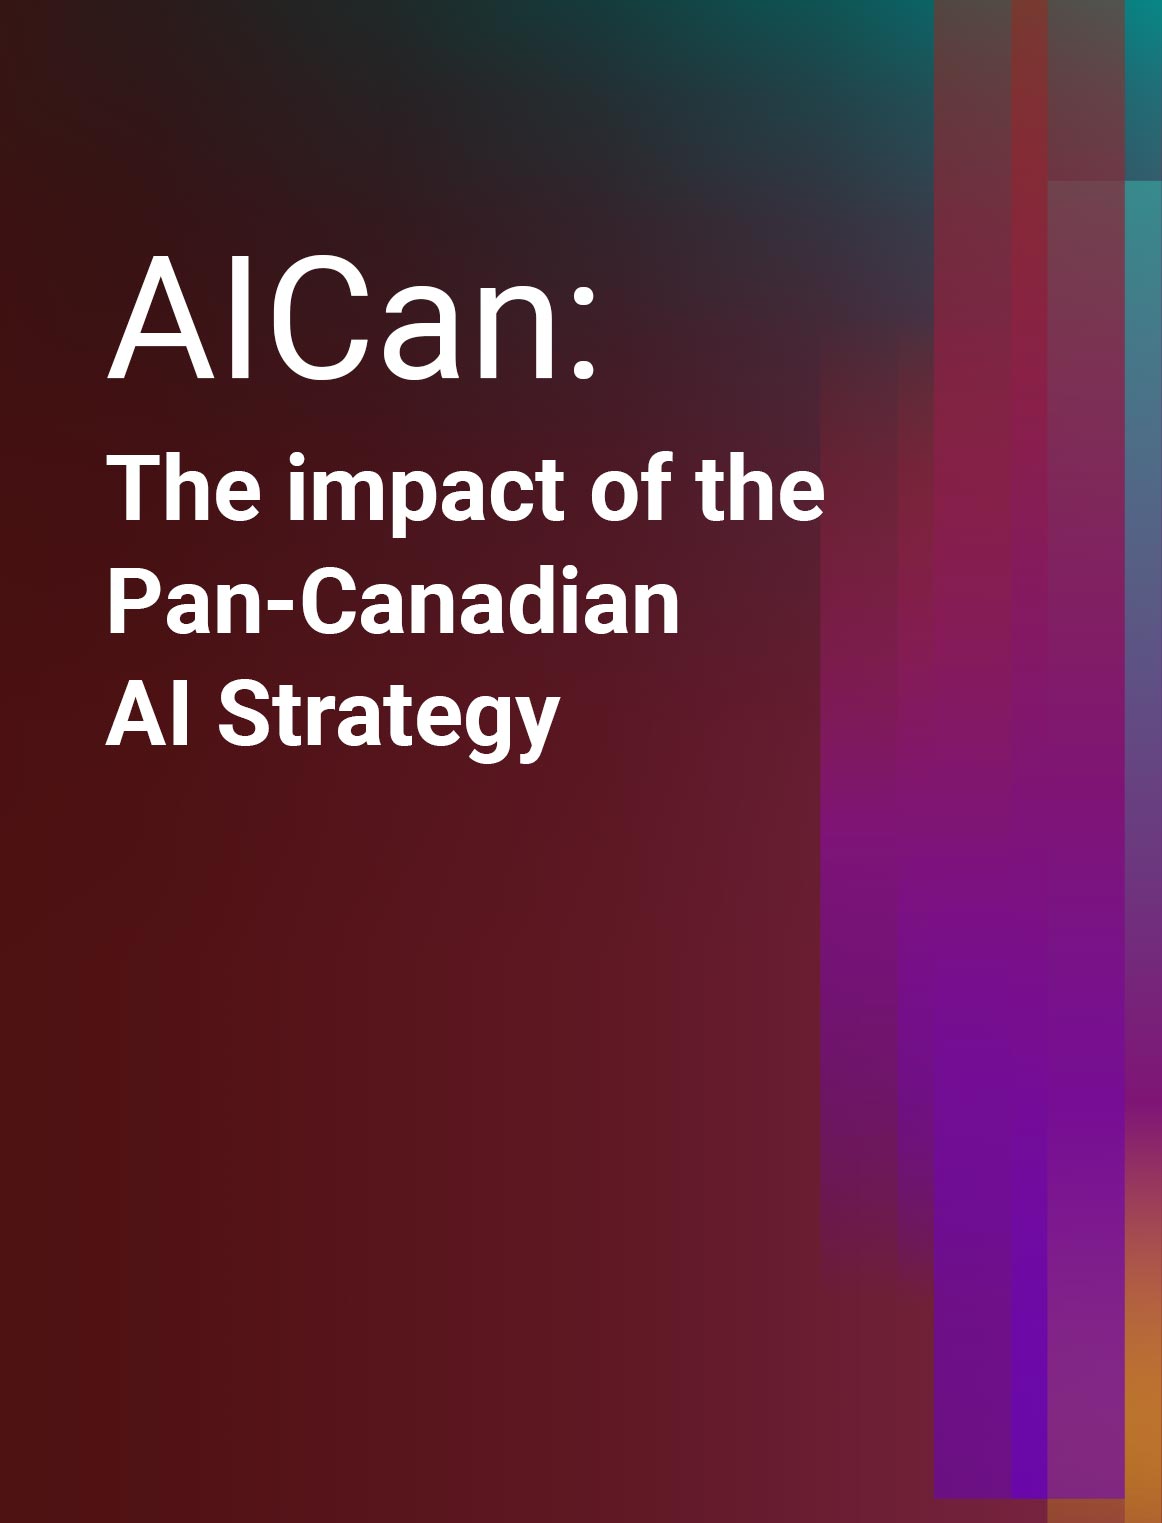 AICan: The impact of the Pan-Canadian AI Strategy